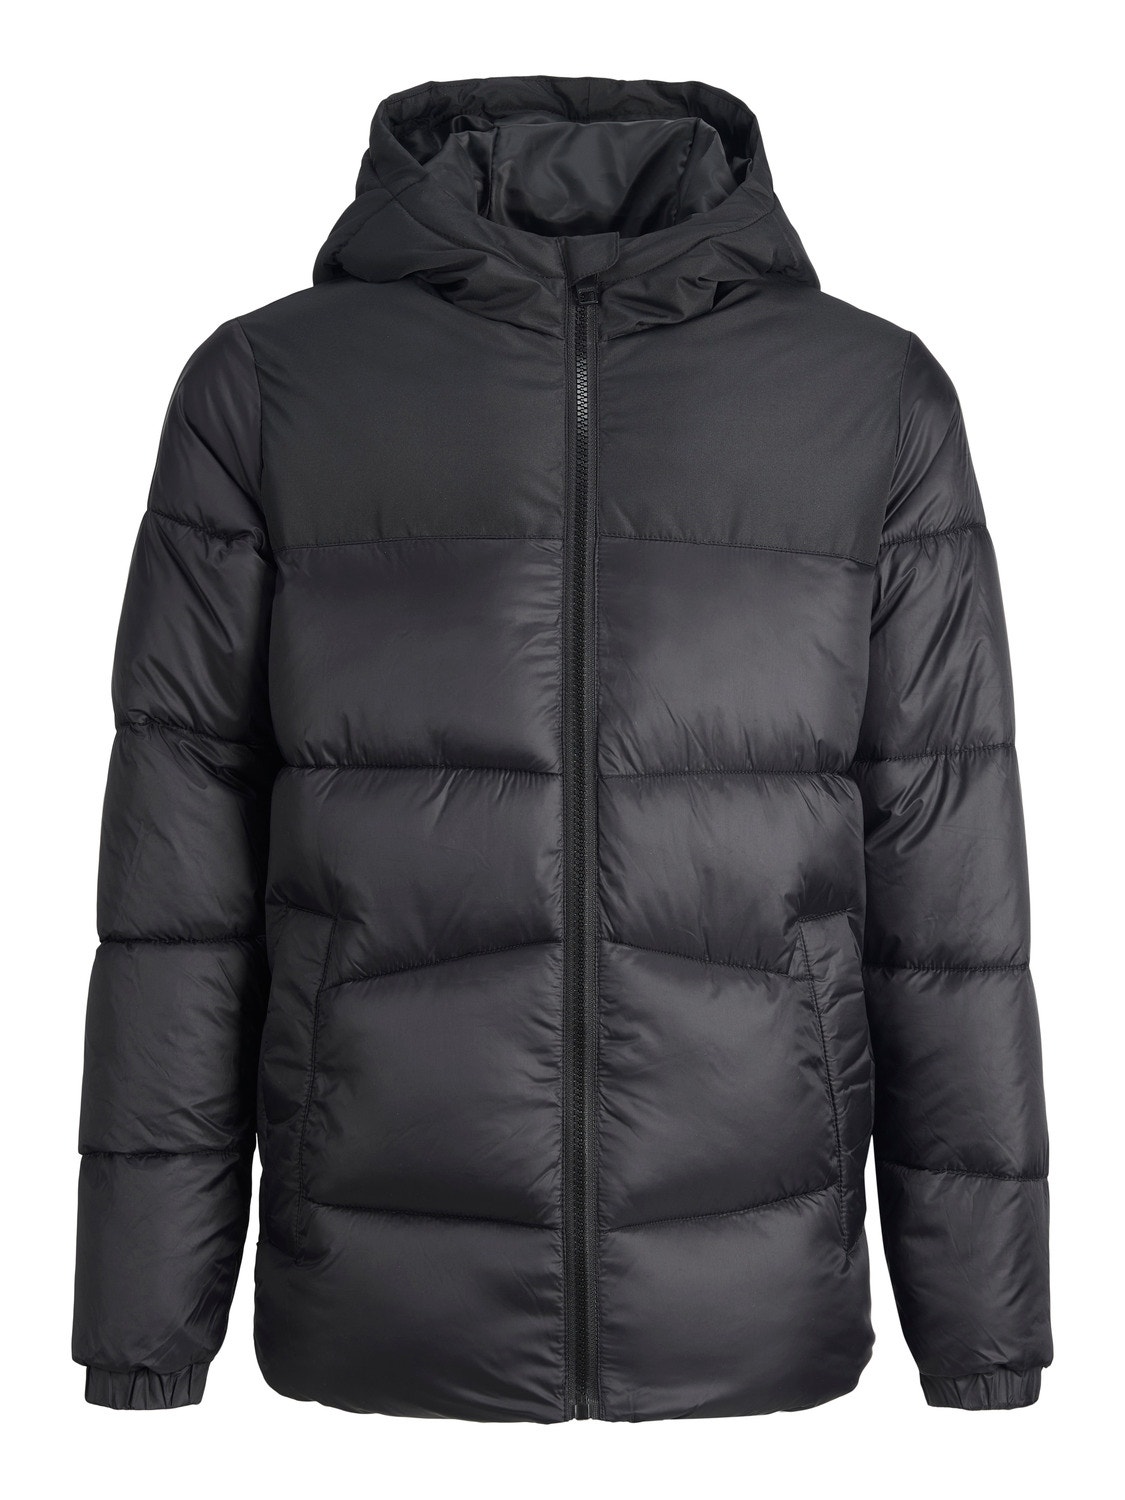 Puffer jacket For boys with 60% discount! | Jack & Jones®